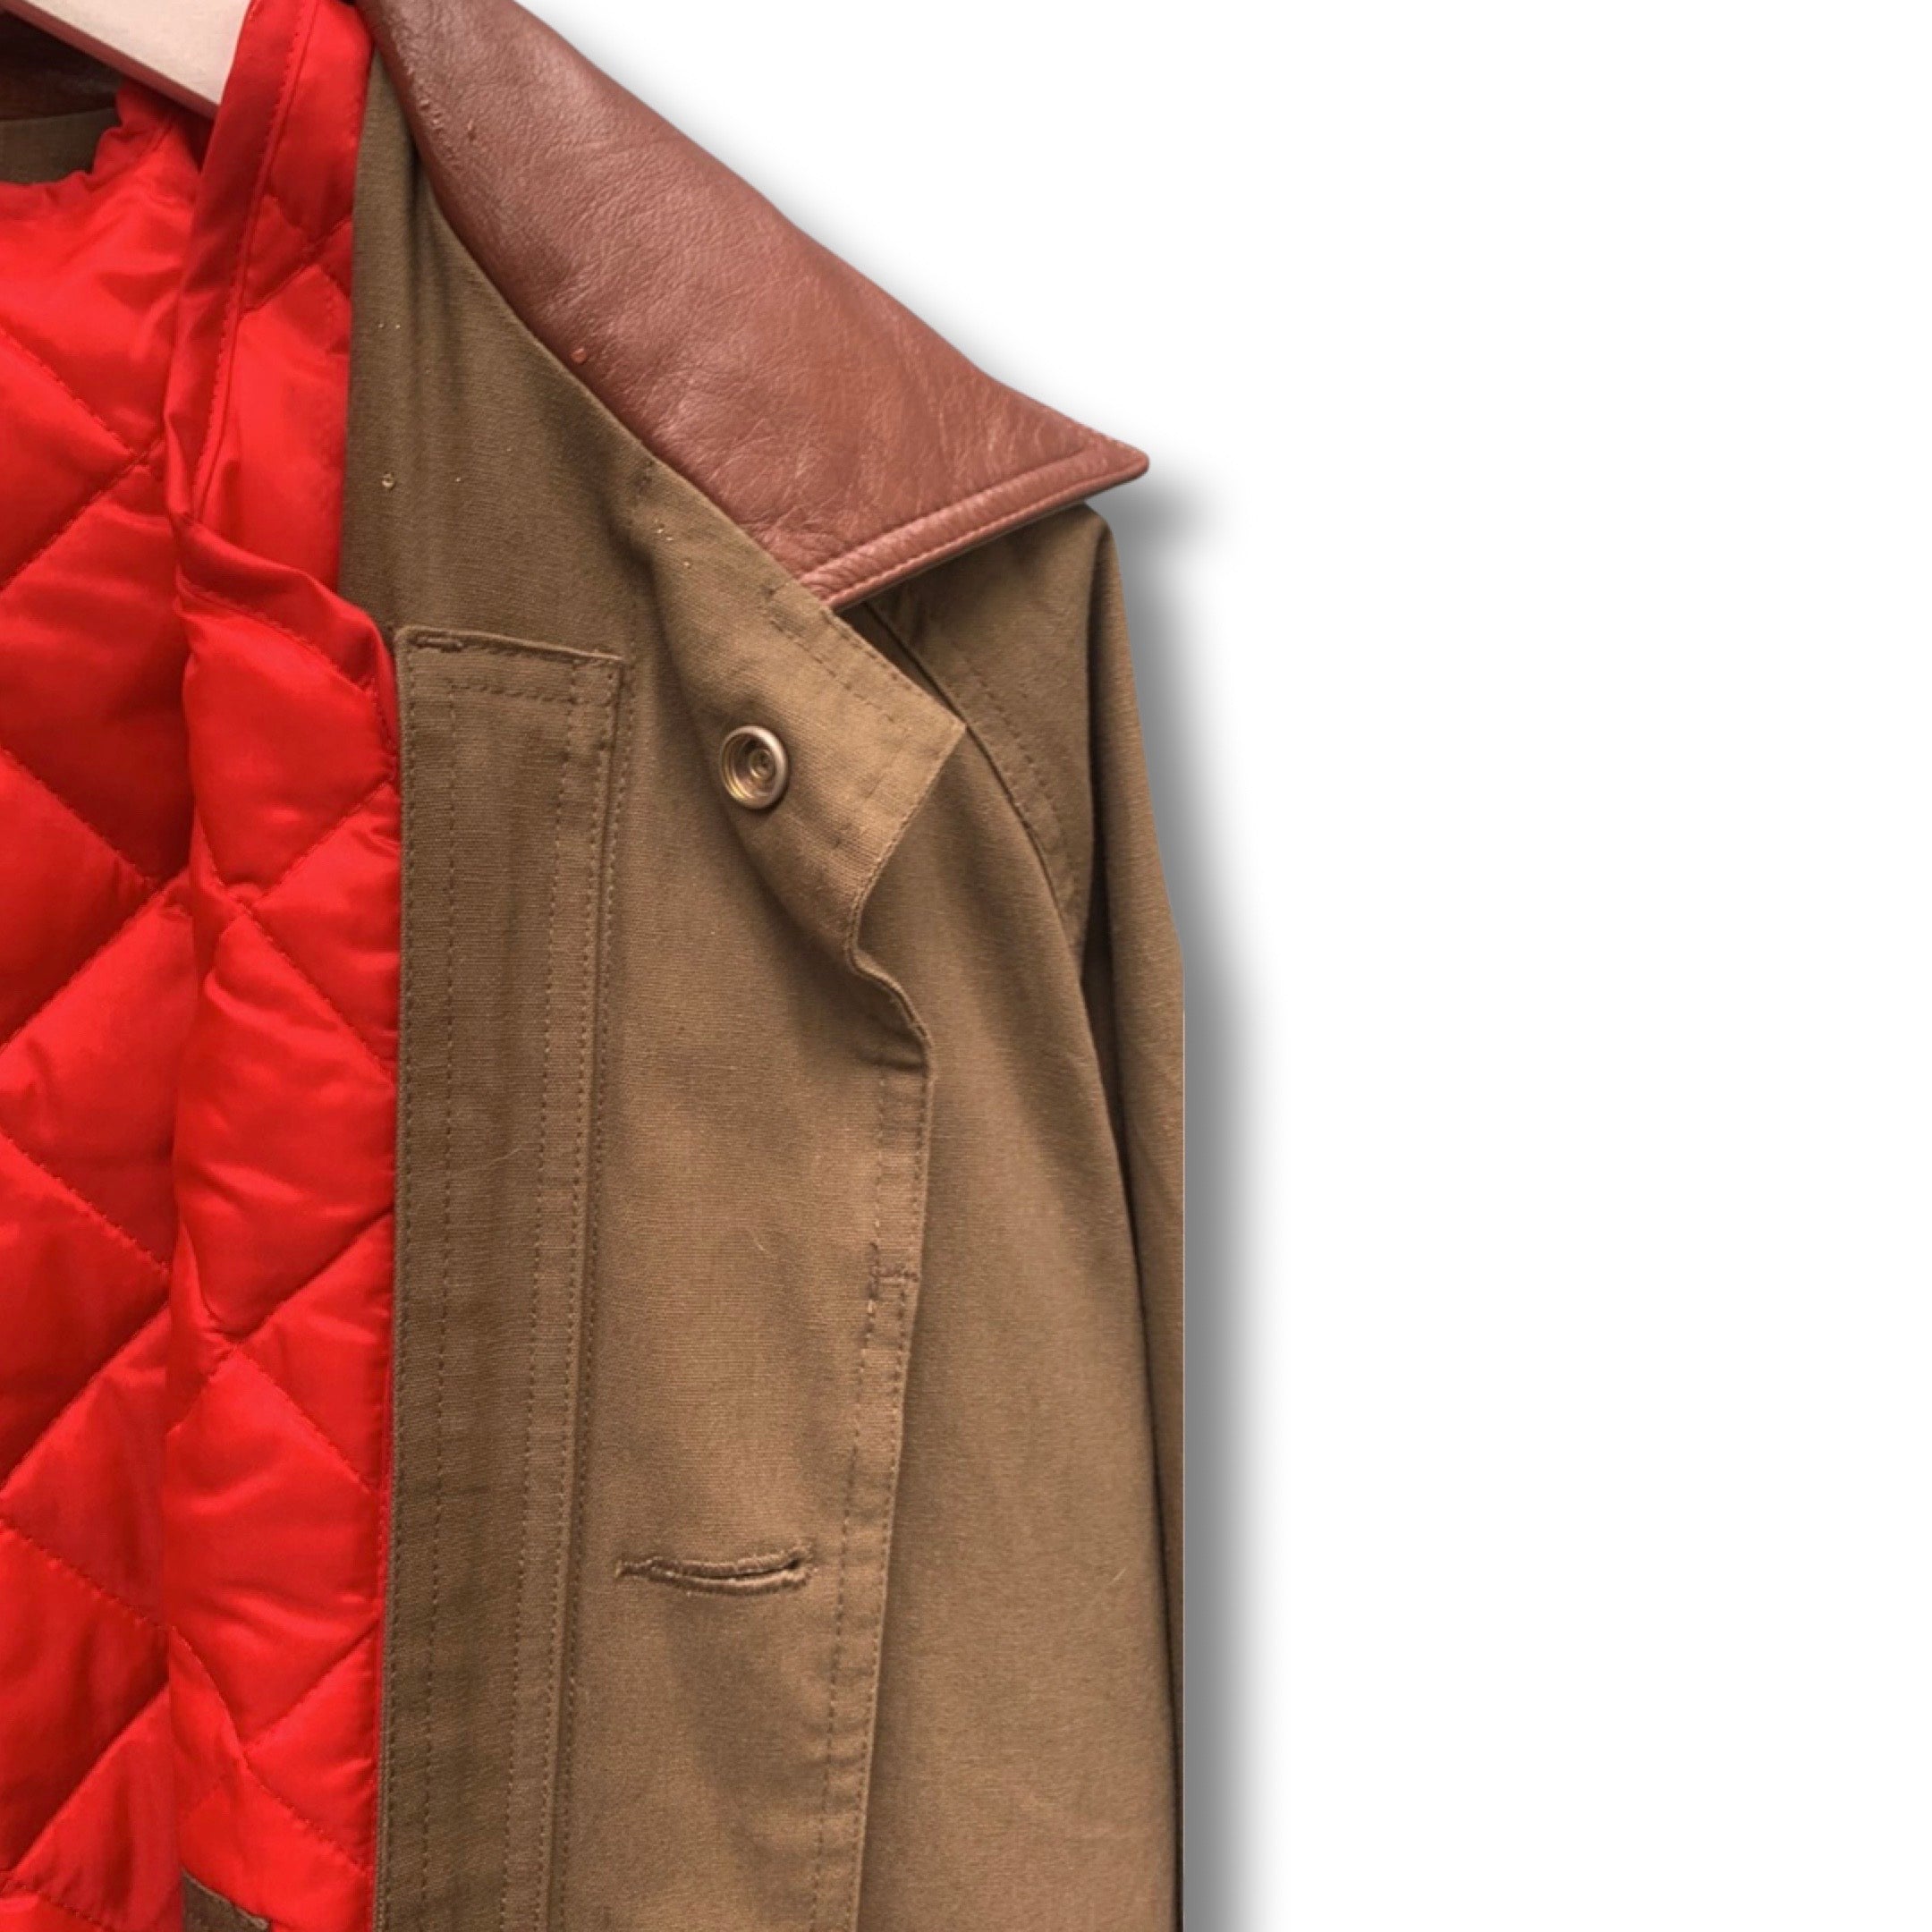 Long khaki brown vintage coat with quilted inner red jacket.